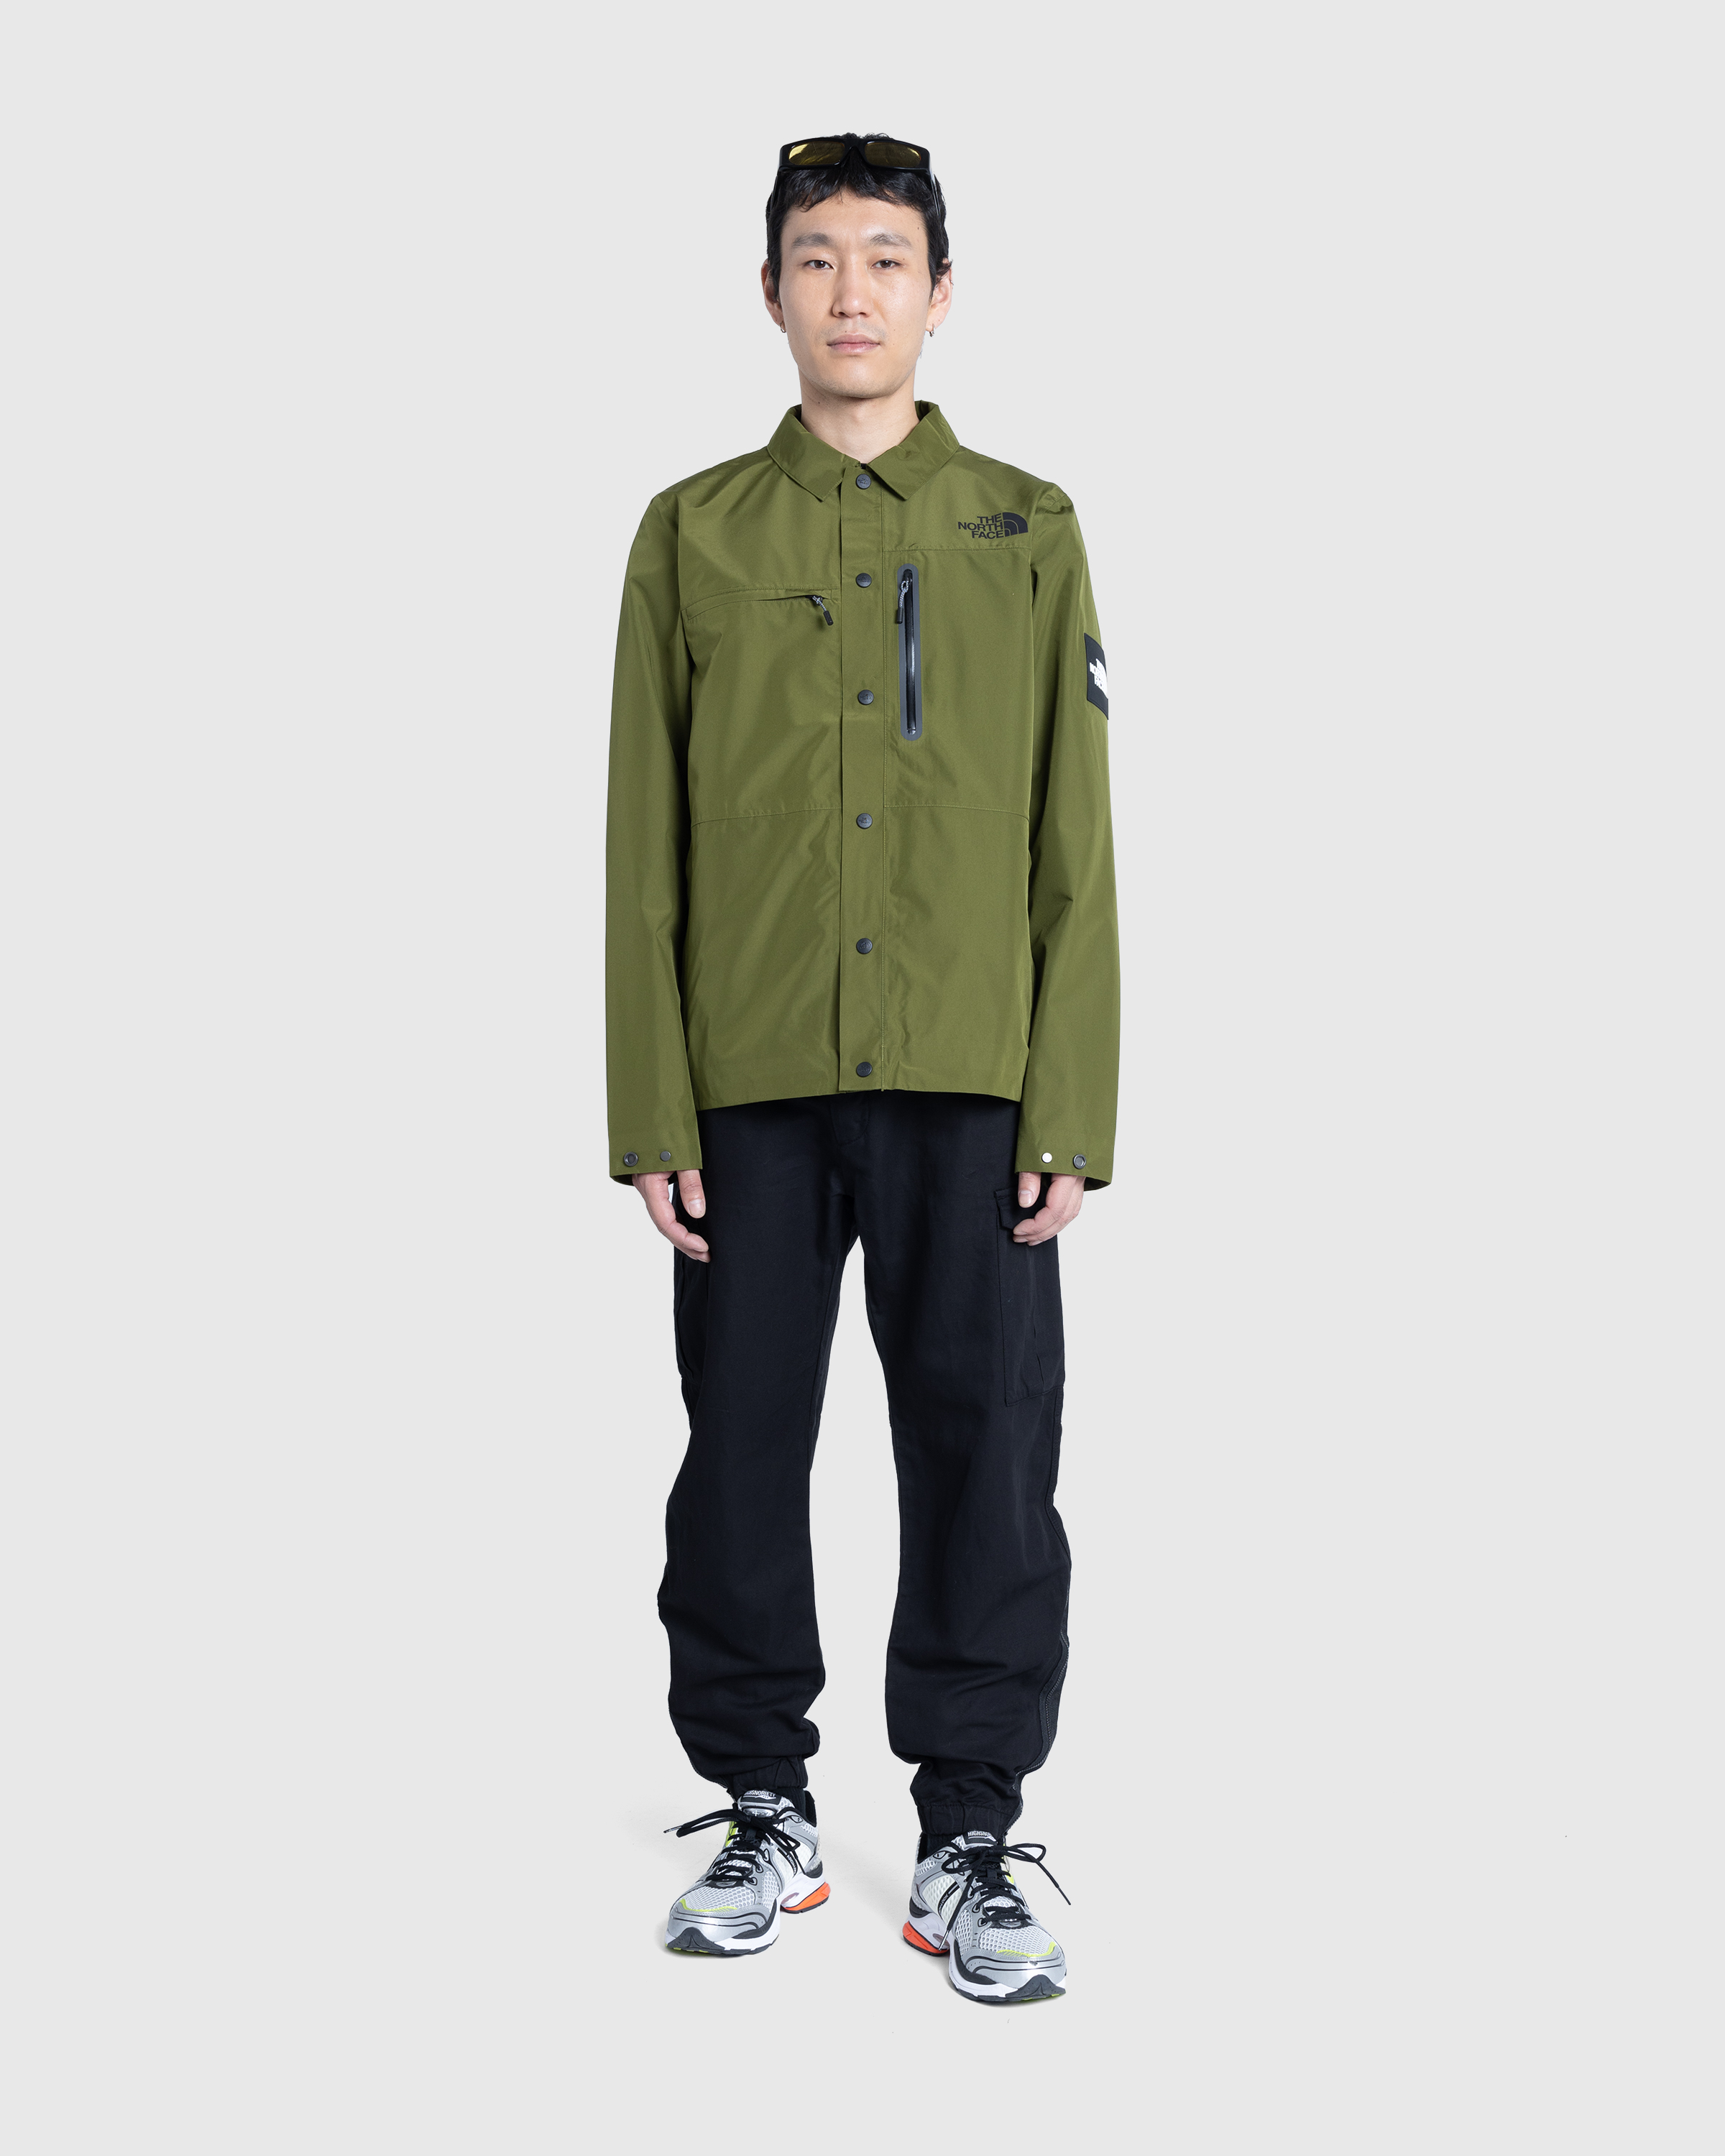 The North Face – Amos Tech Overshirt Forest Olive - Overshirt - Green - Image 3